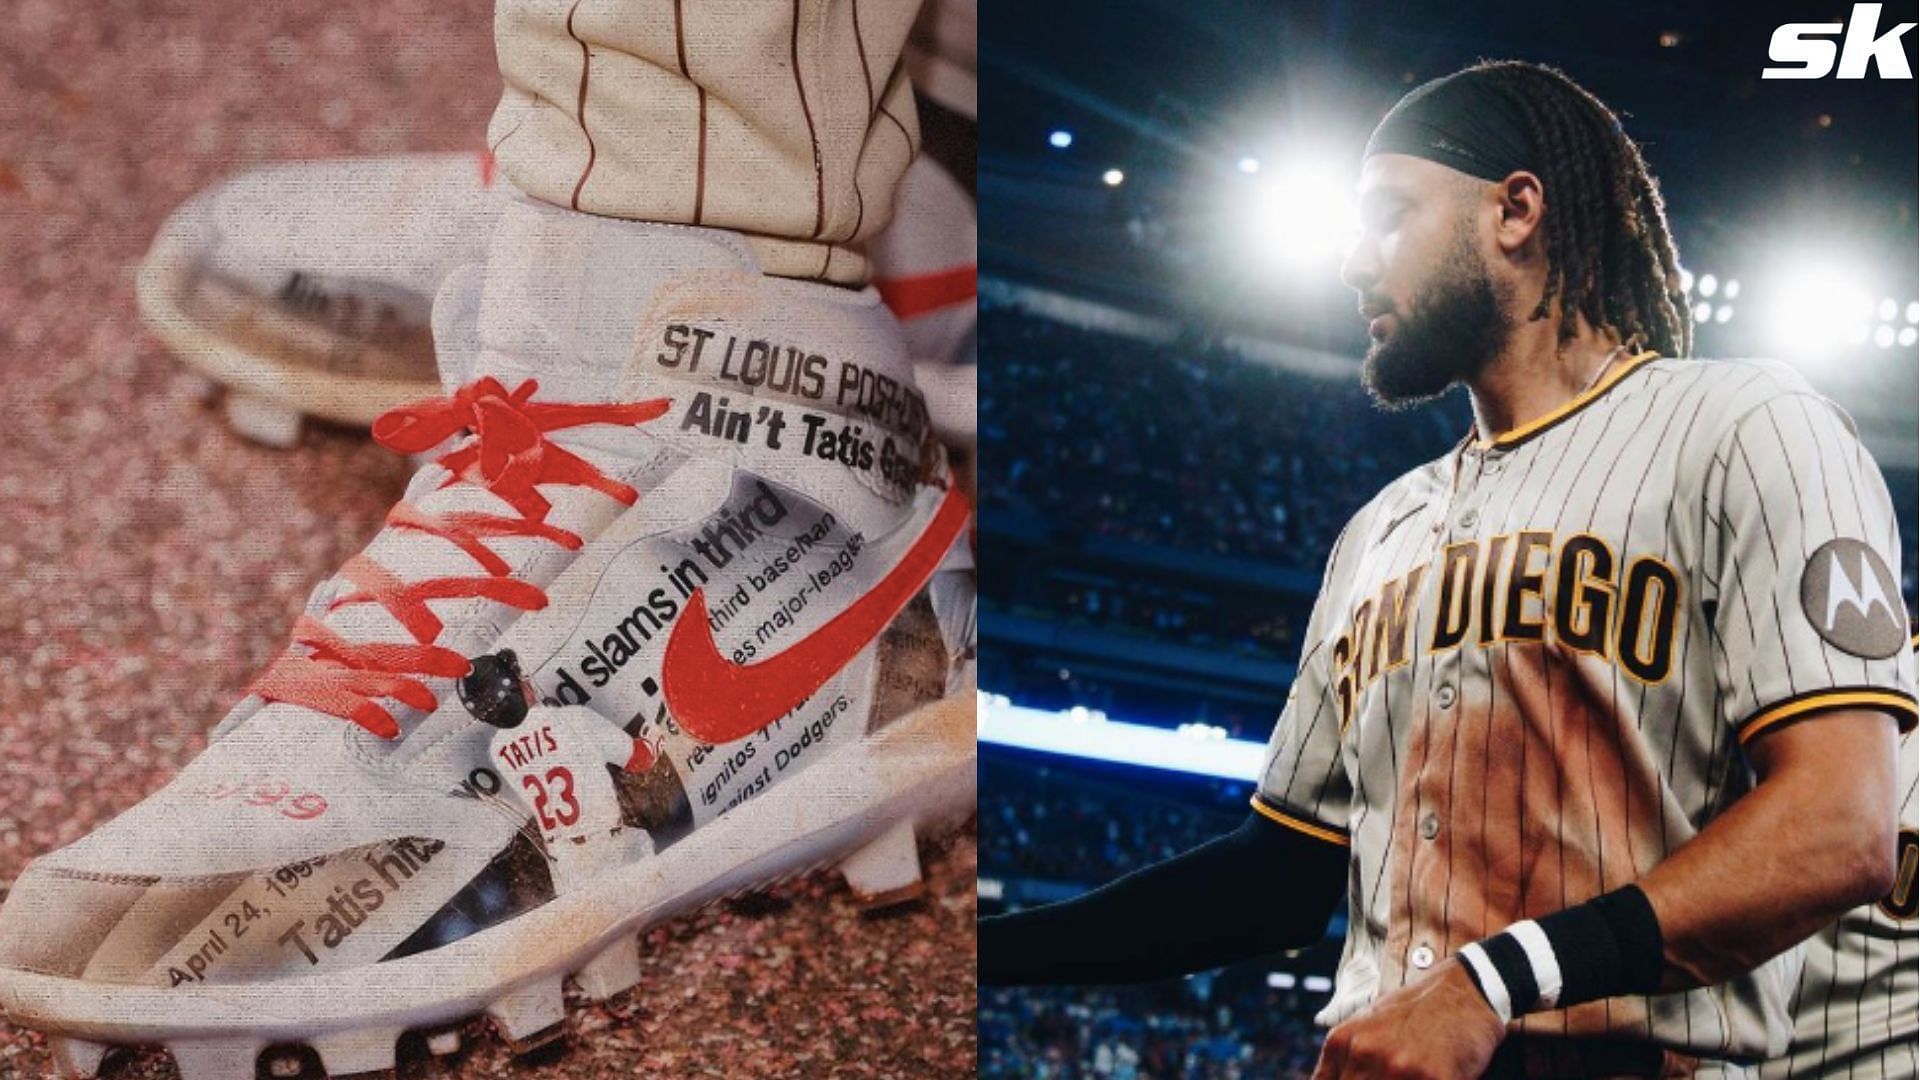 Why did Fernando Tatis Jr. fashion custom-made cleats against Cardinals?  Padres fan favorite's latest tribute explored